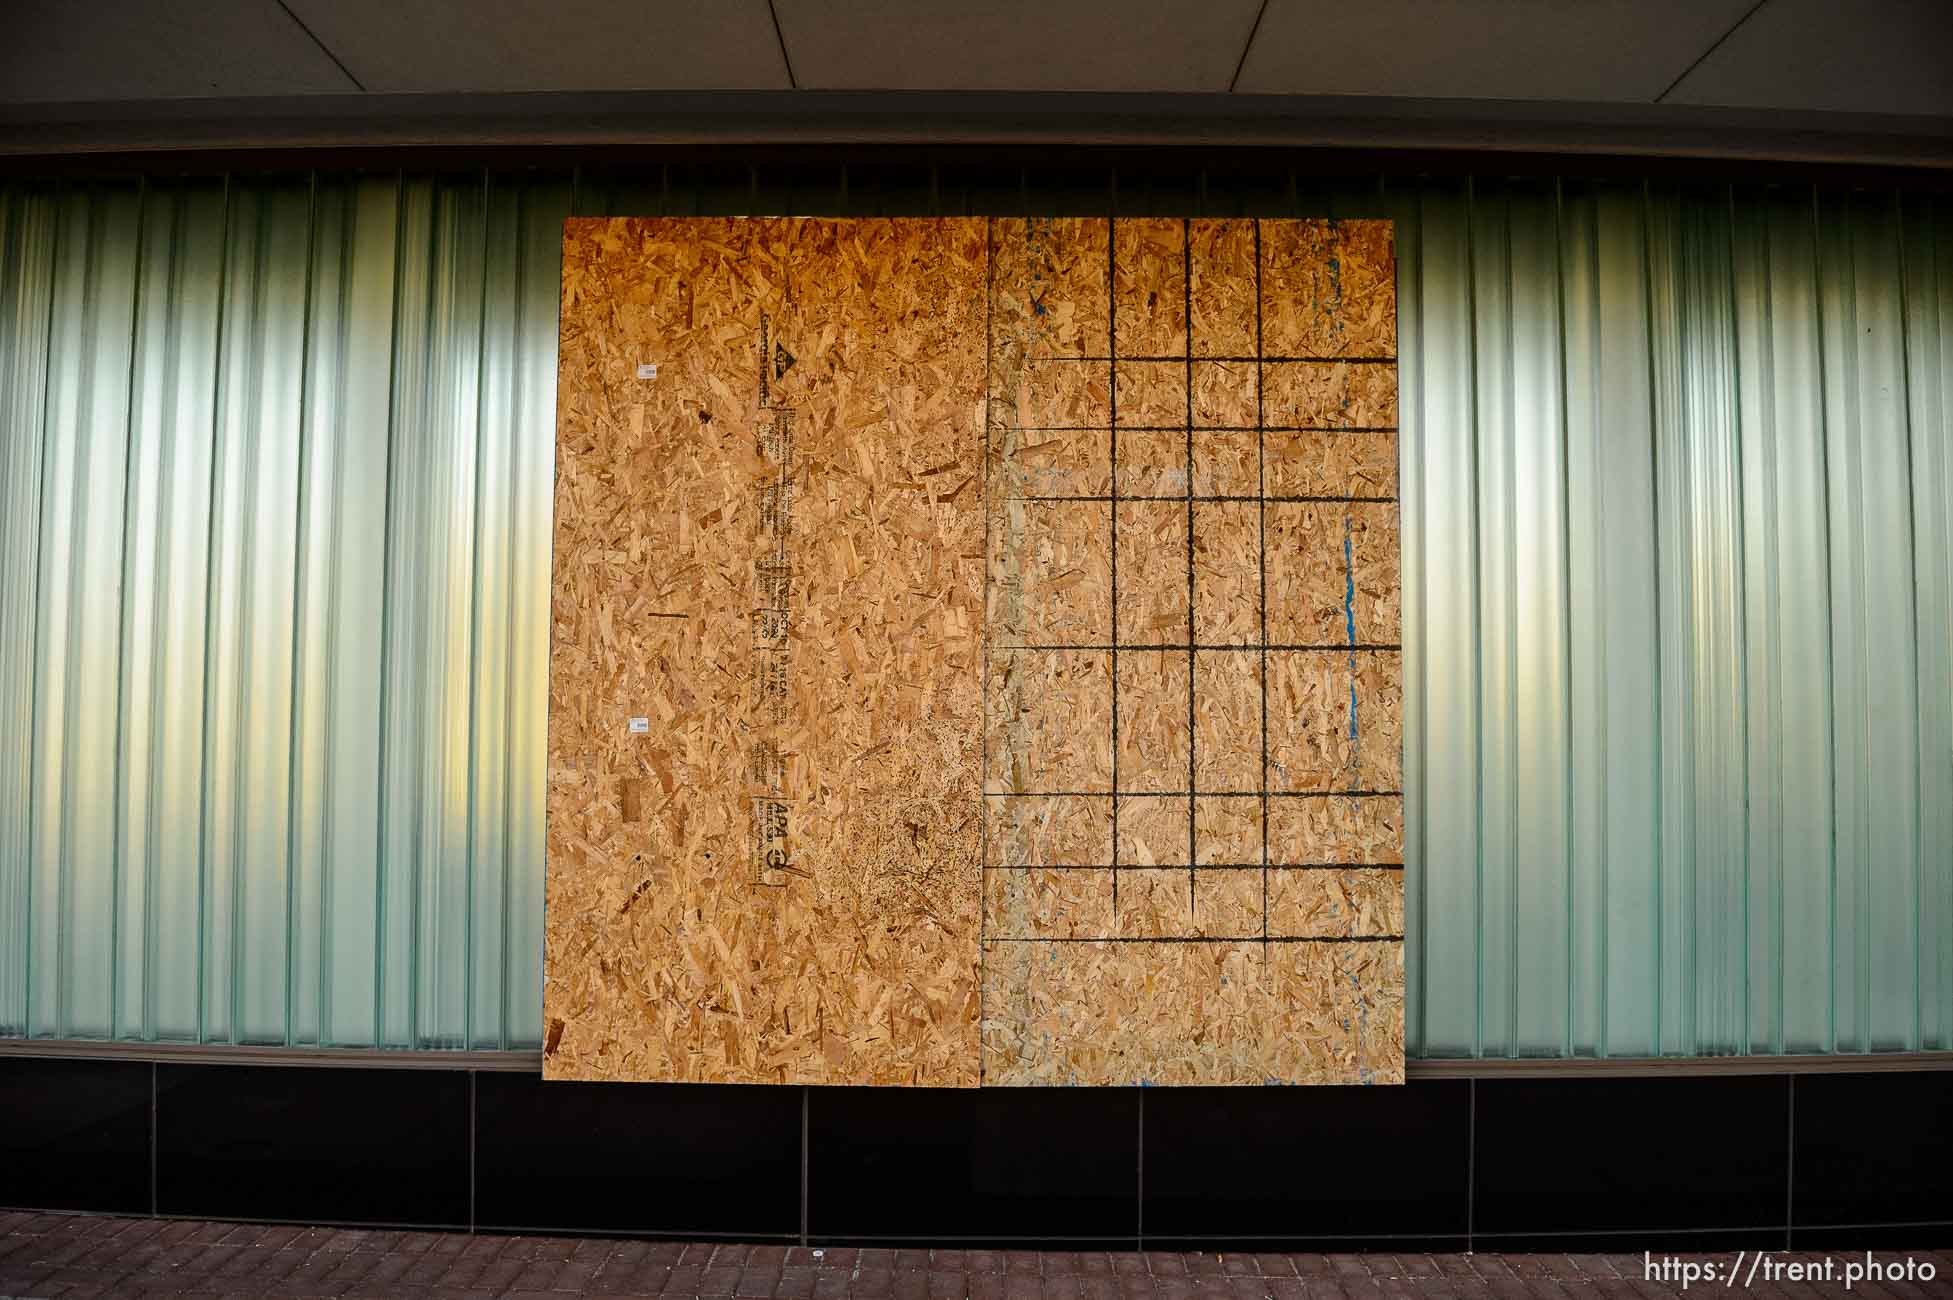 Election Day – Boarded Up